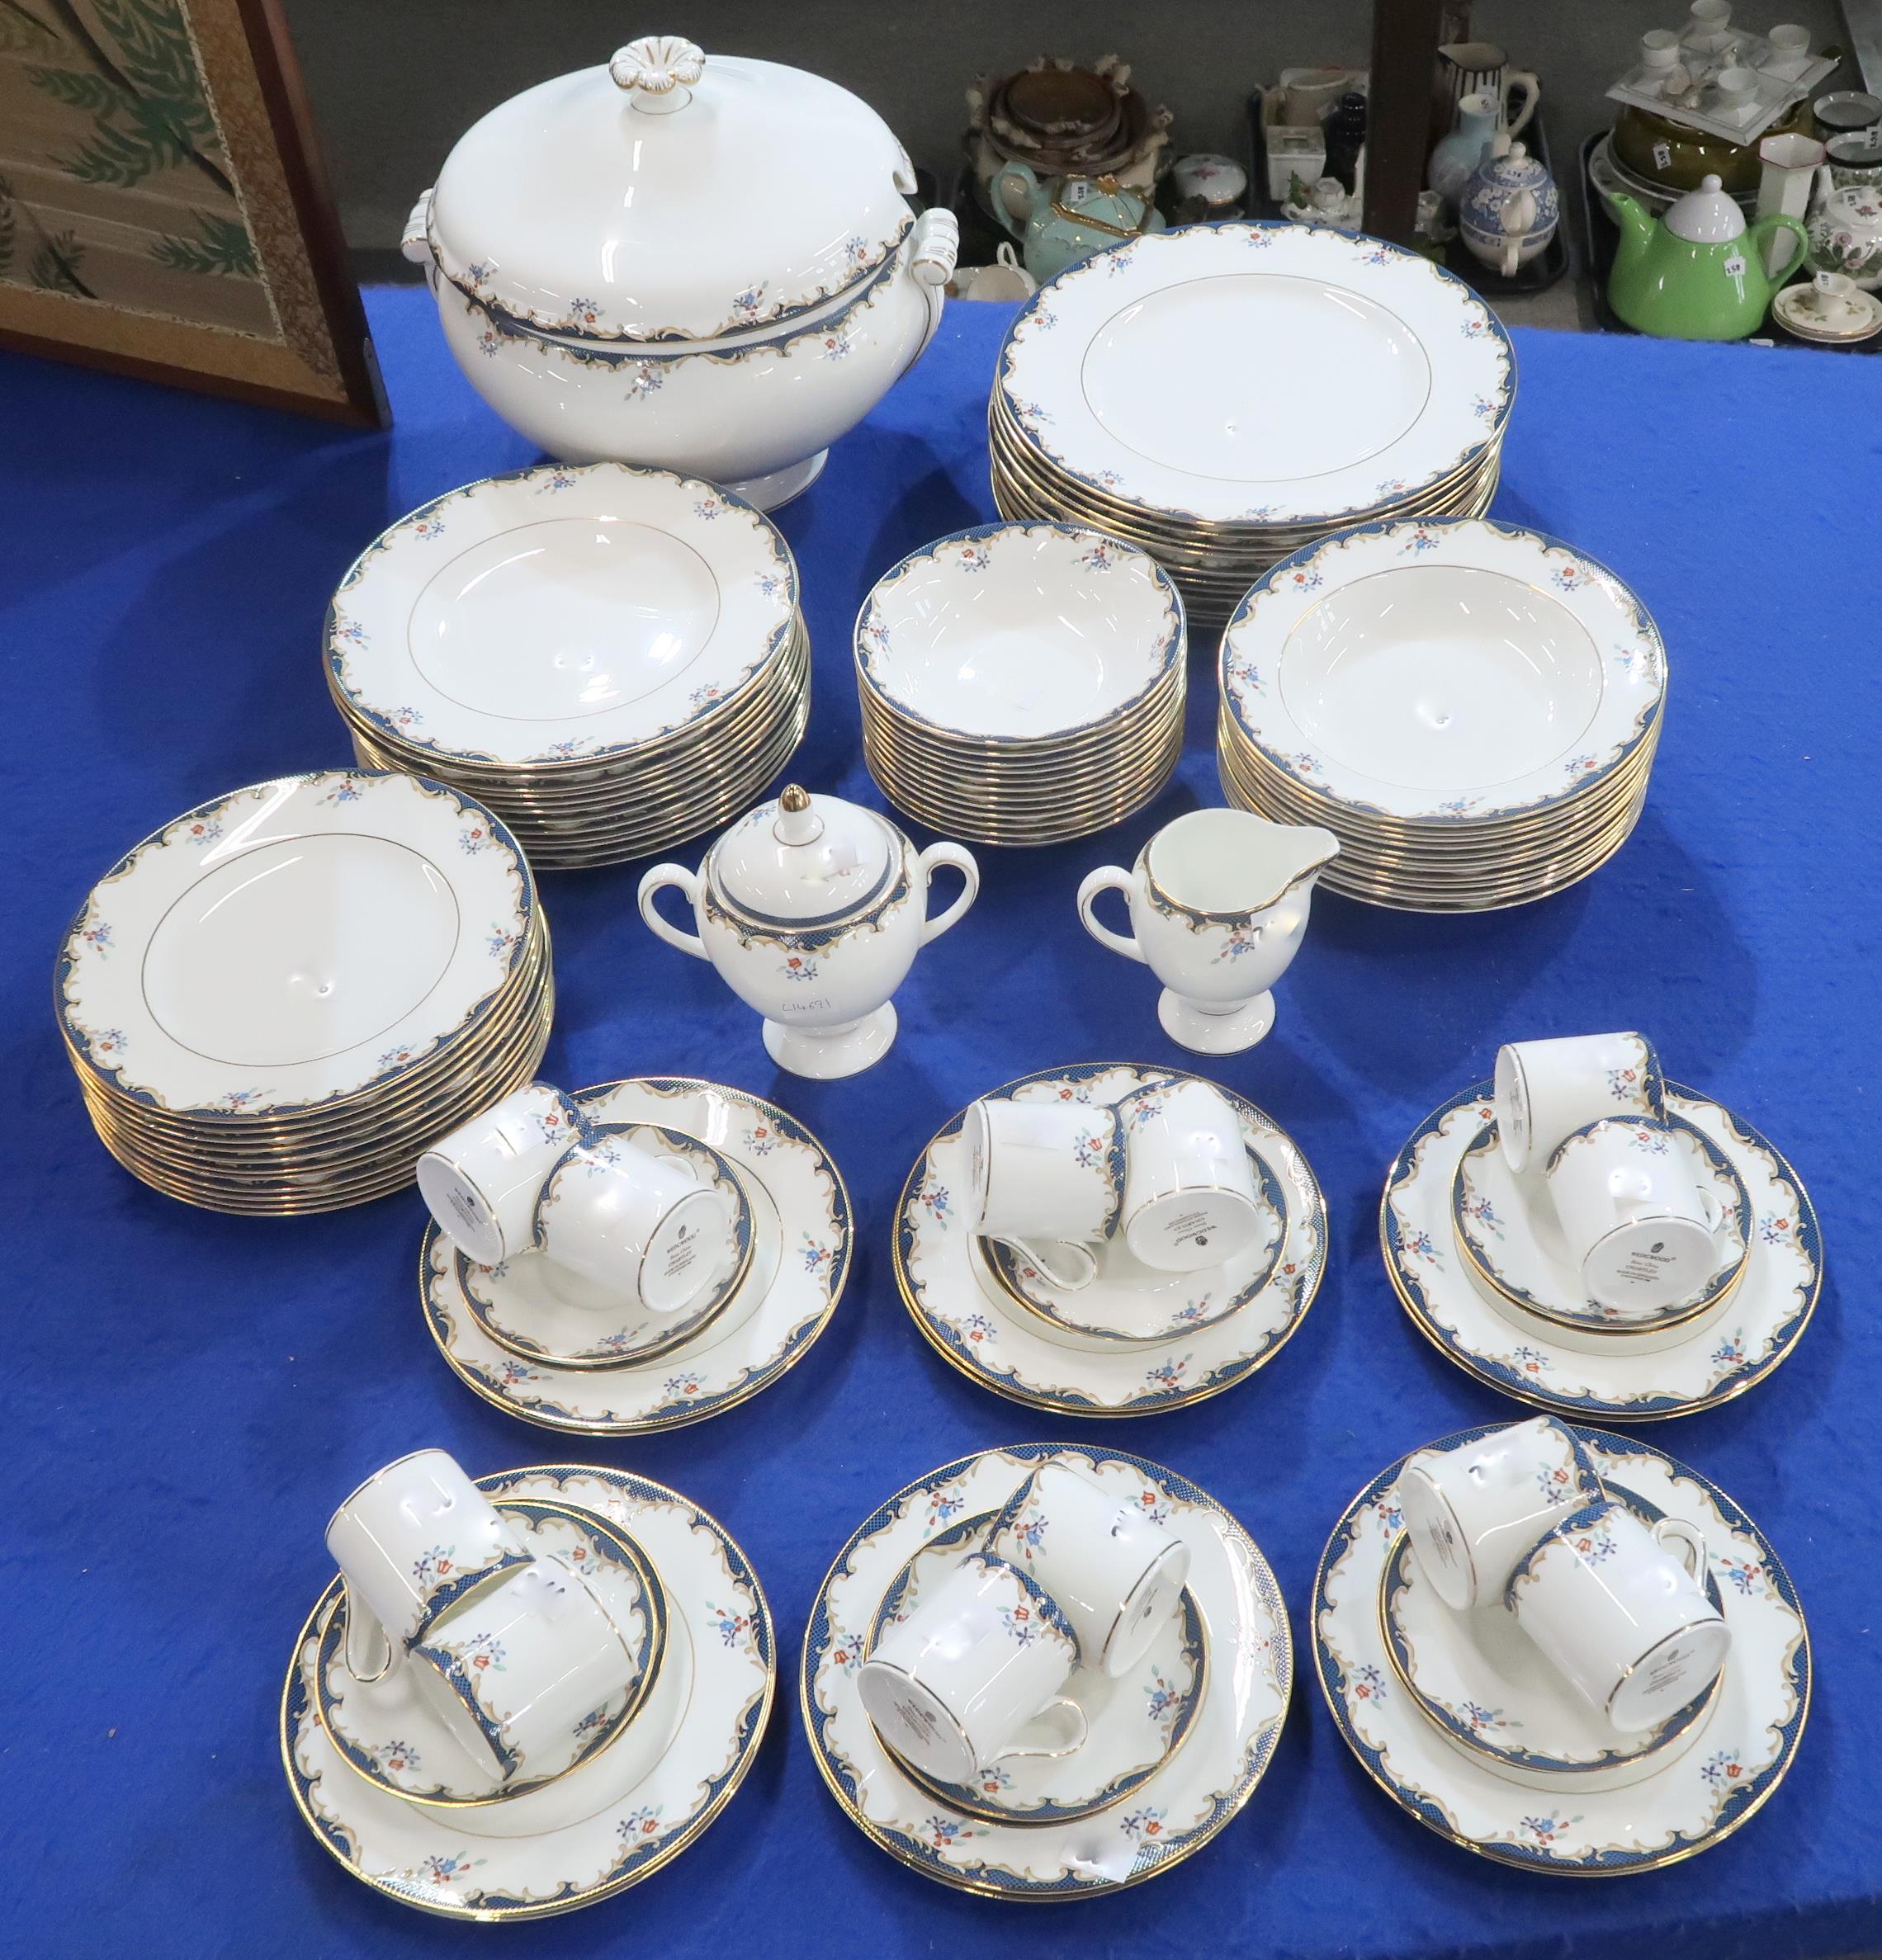 A Wedgwood Chartley pattern dinner service for twelve comprising plates, bowls, coffee cups and